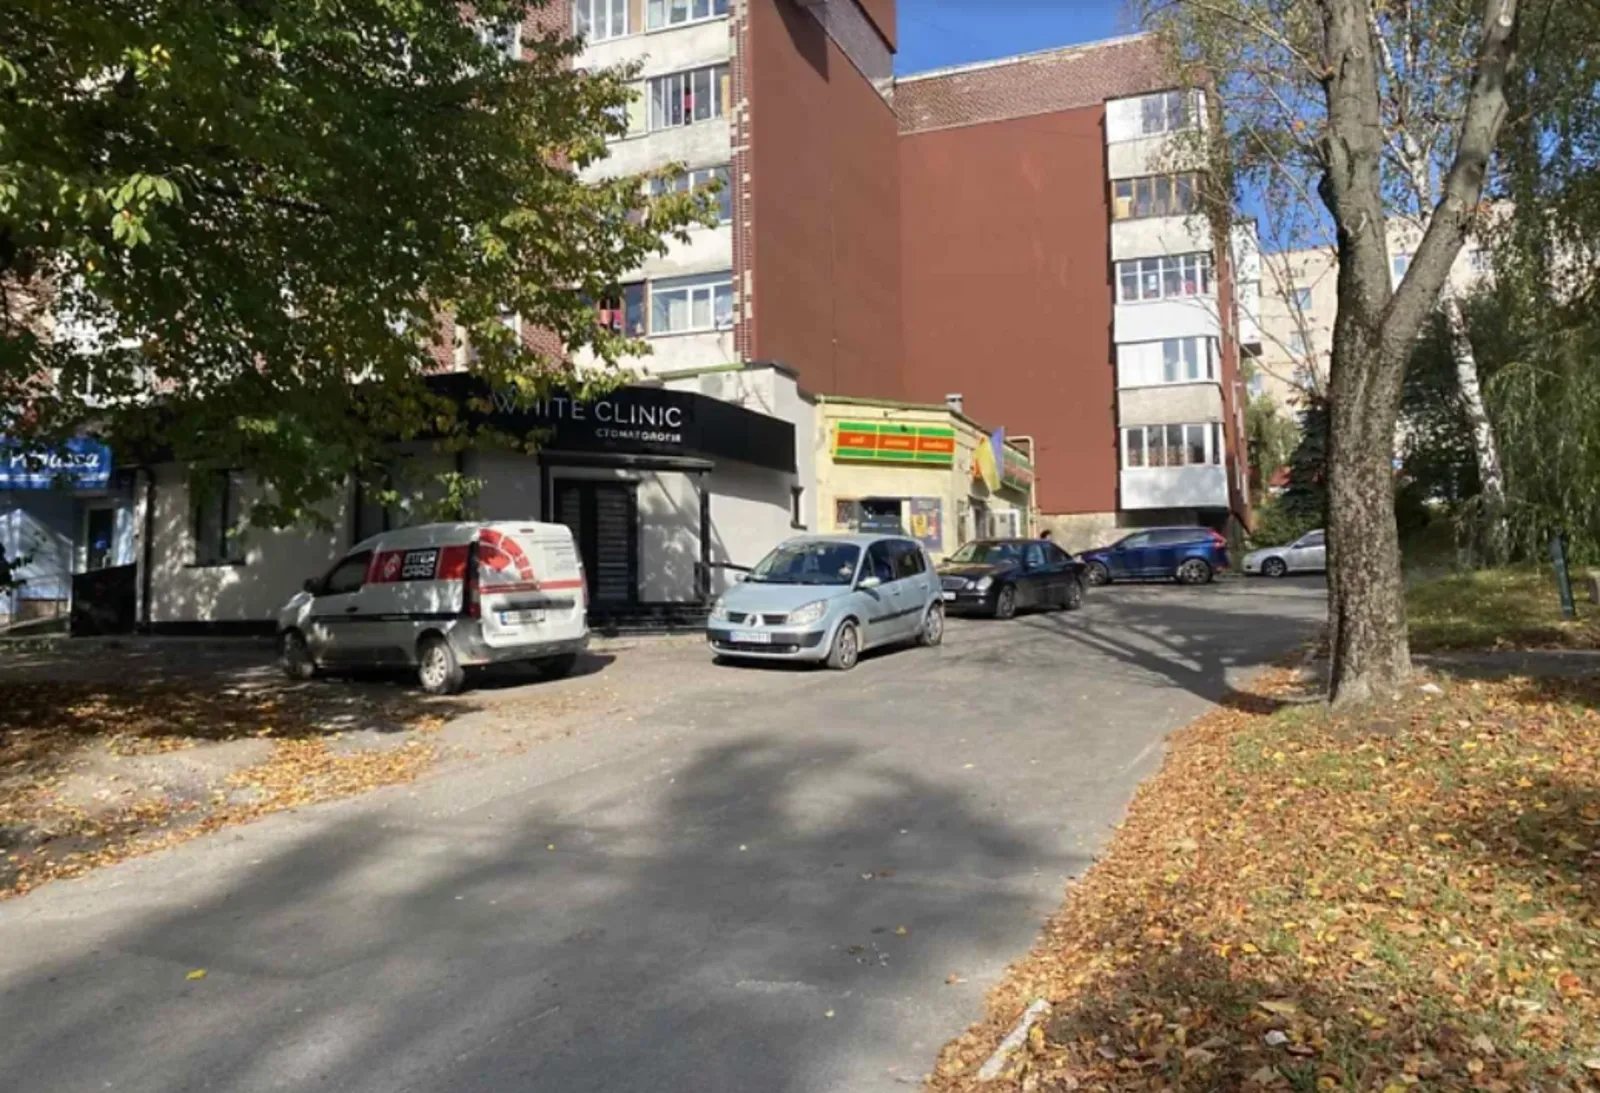 Real estate for sale for commercial purposes. 107 m², 1st floor/9 floors. Bam, Ternopil. 